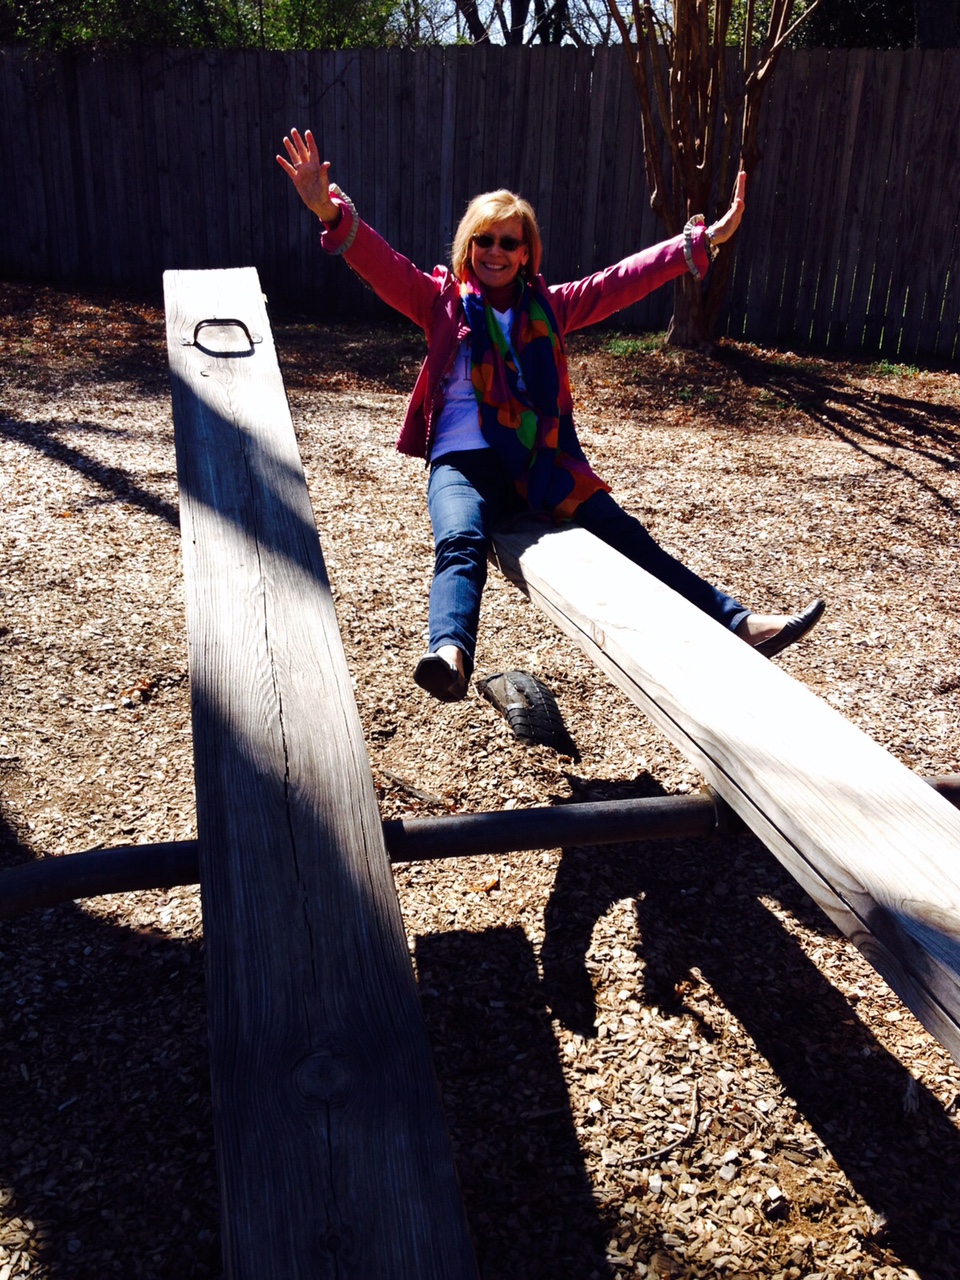 penny-celebrating-on-the-see-saw-2015